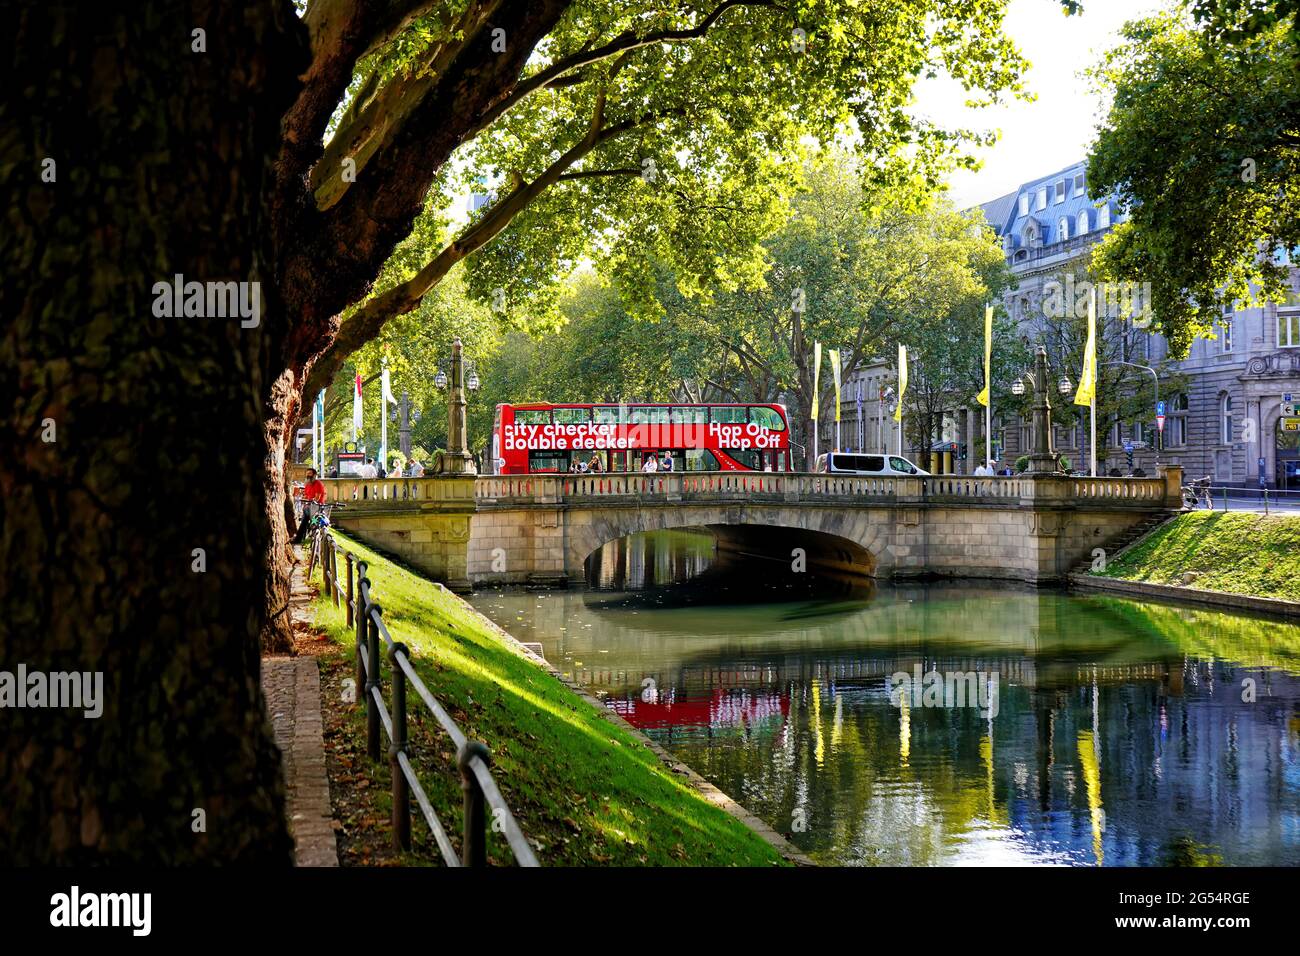 The beautiful city canal 'Stadtgraben' on Königsallee with its old trees. Red doubledecker tour bus waiting on a bridge crossing the canal. Stock Photo